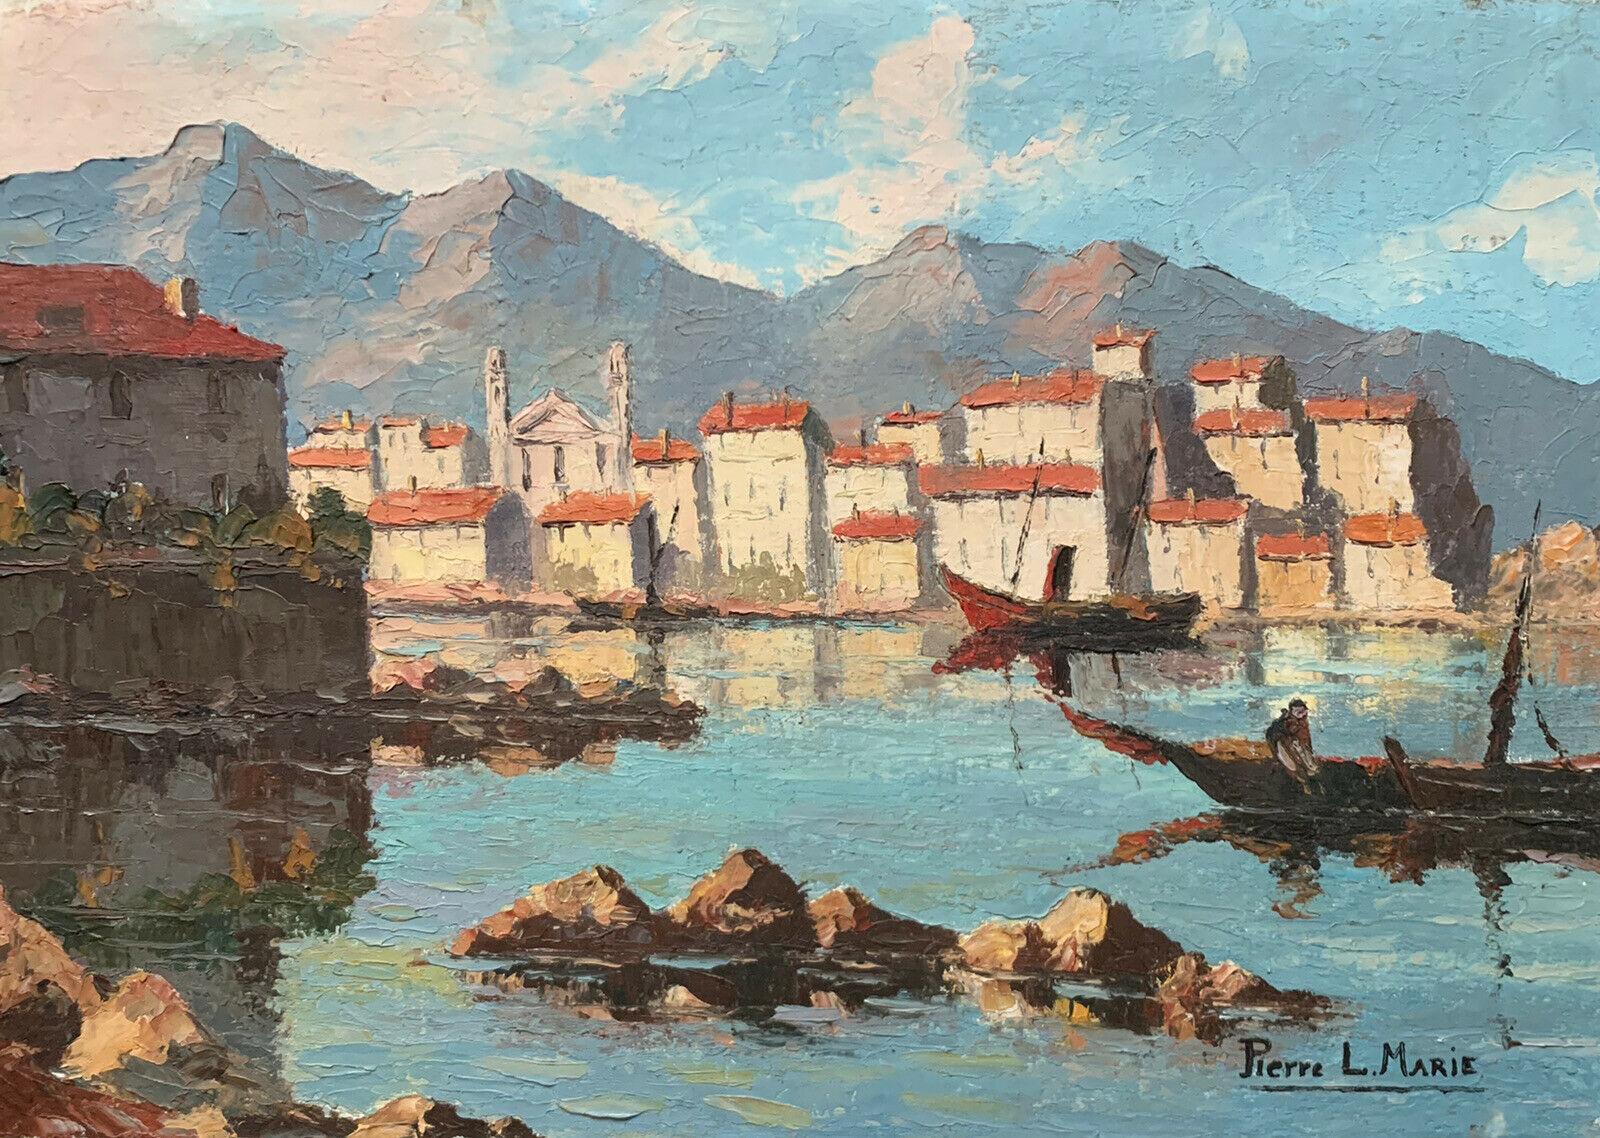 Pierre L. Marie Figurative Painting - VINTAGE FRENCH SIGNED OIL - FISHING BOATS SLEEPY MEDITERRANEAN OLD TOWN HARBOUR